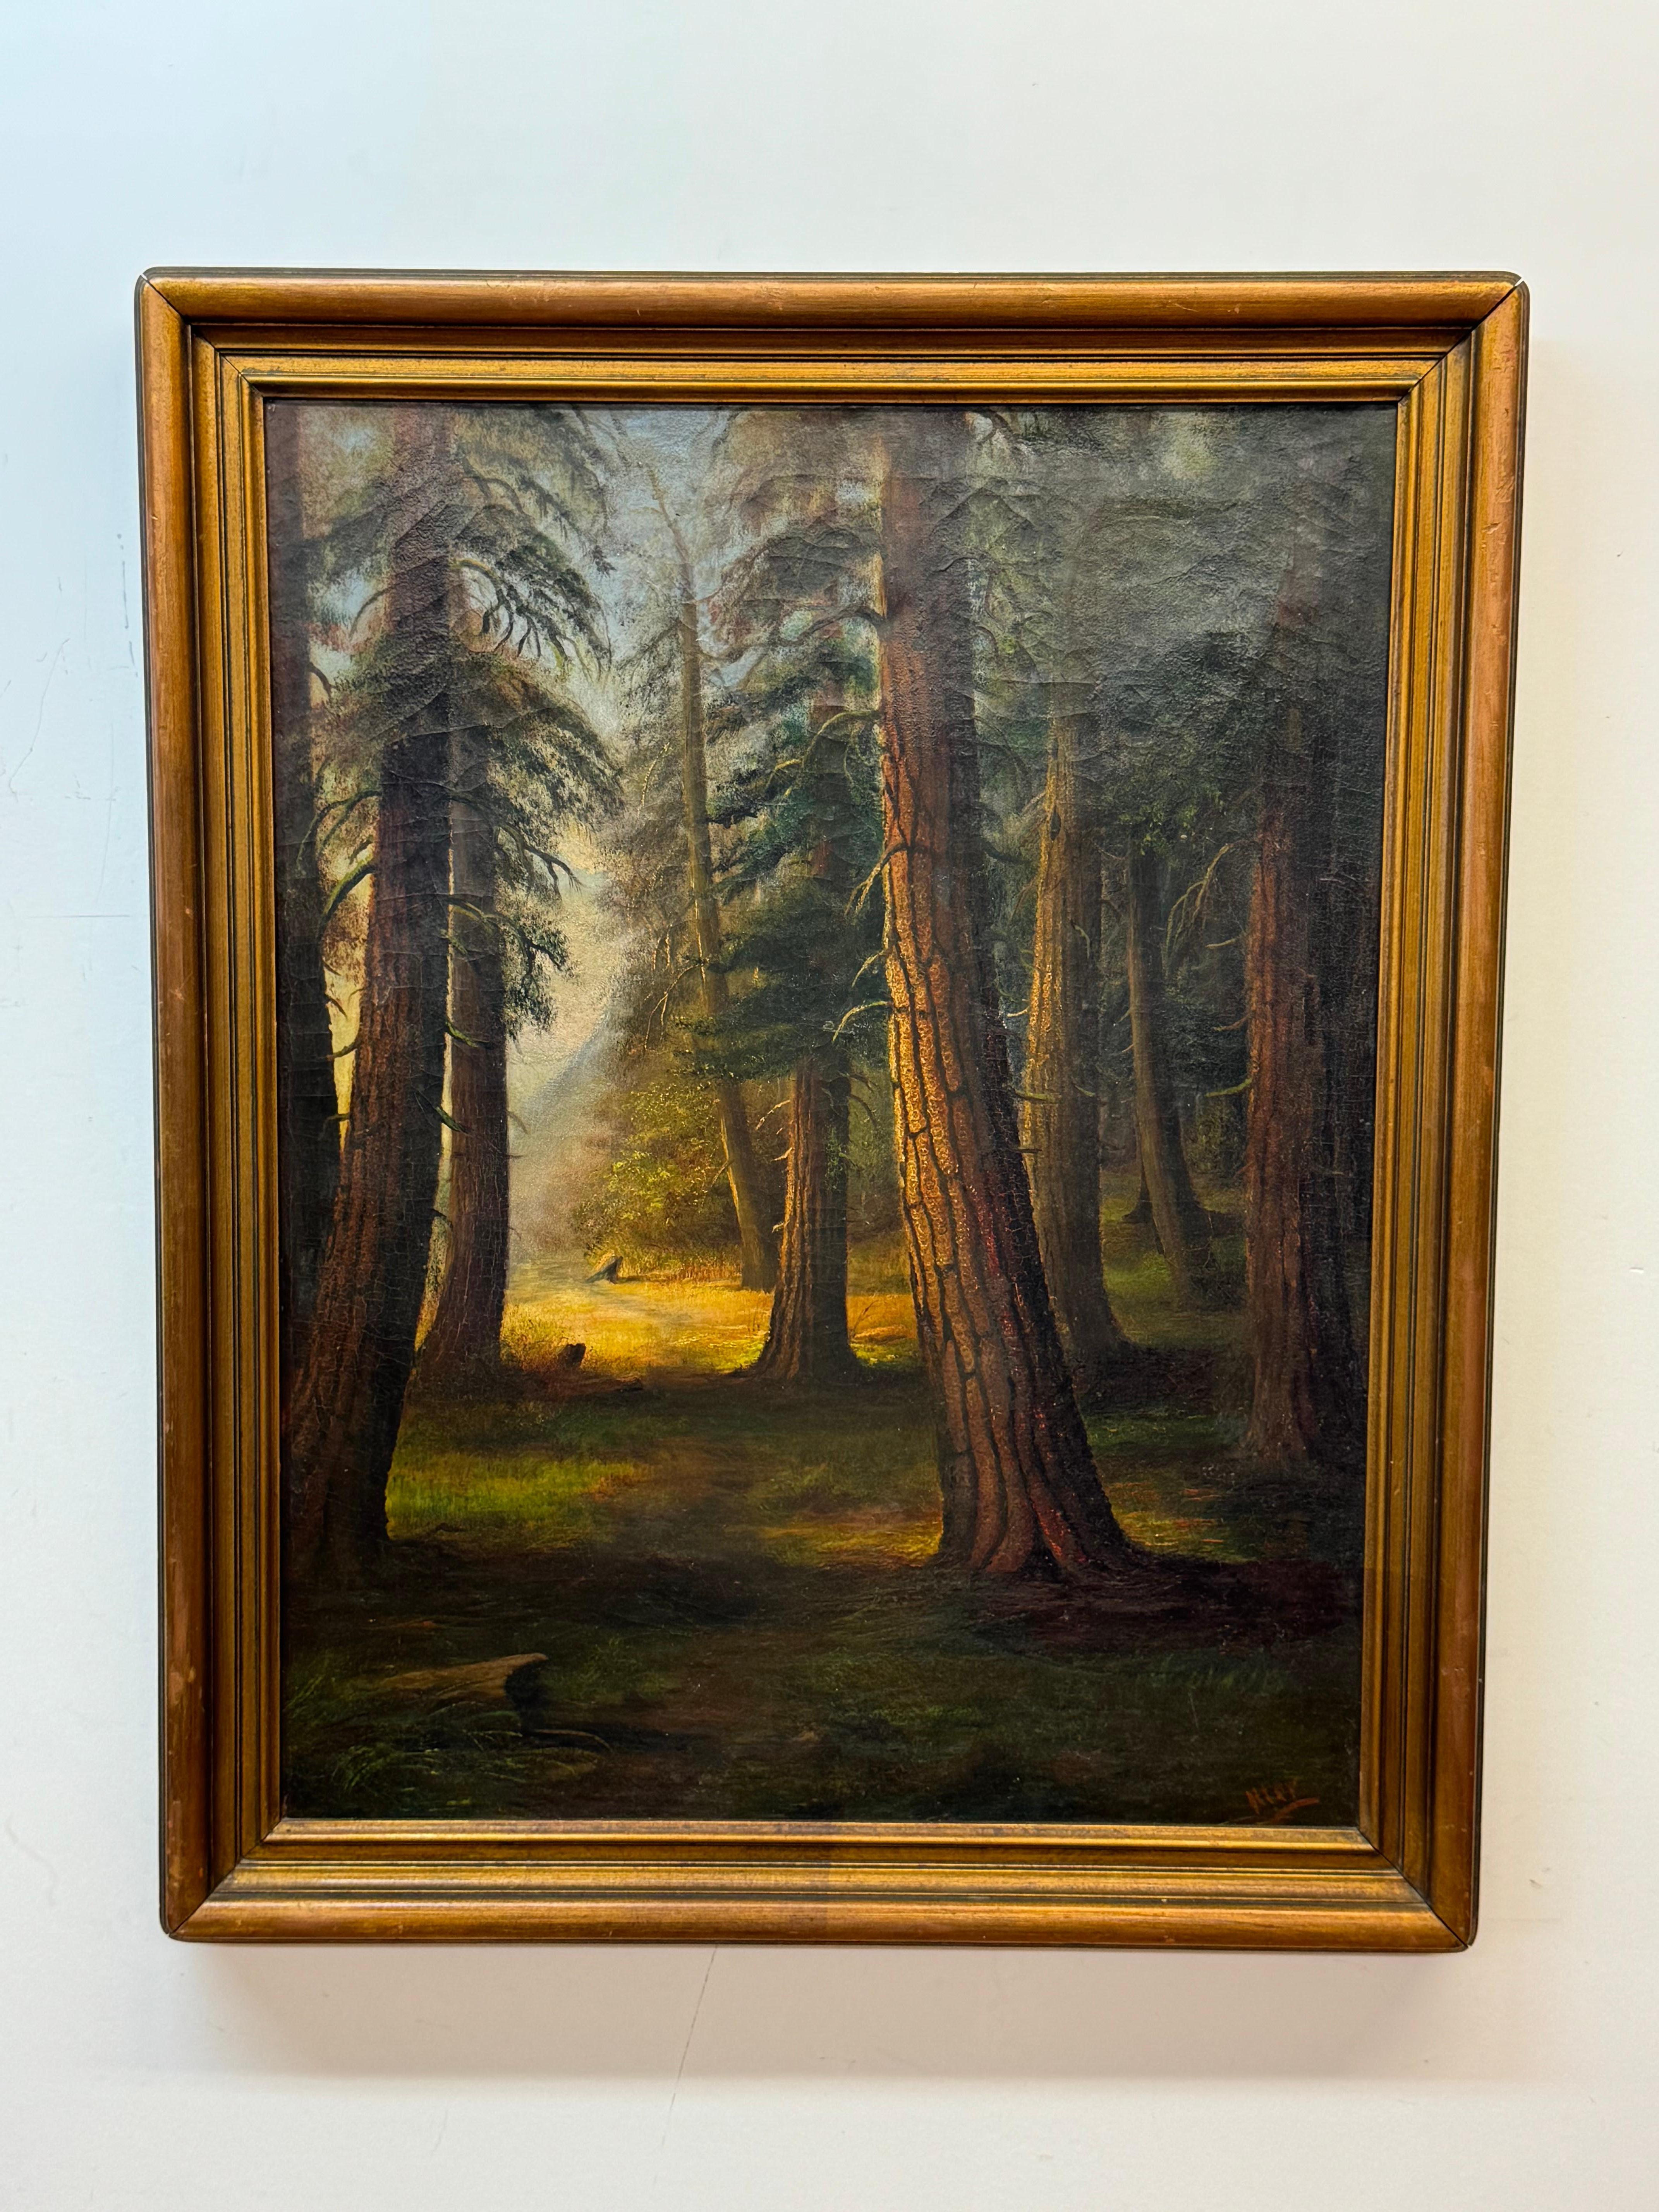 Unknown Landscape Painting - Early 20th century Woodland landscape painting